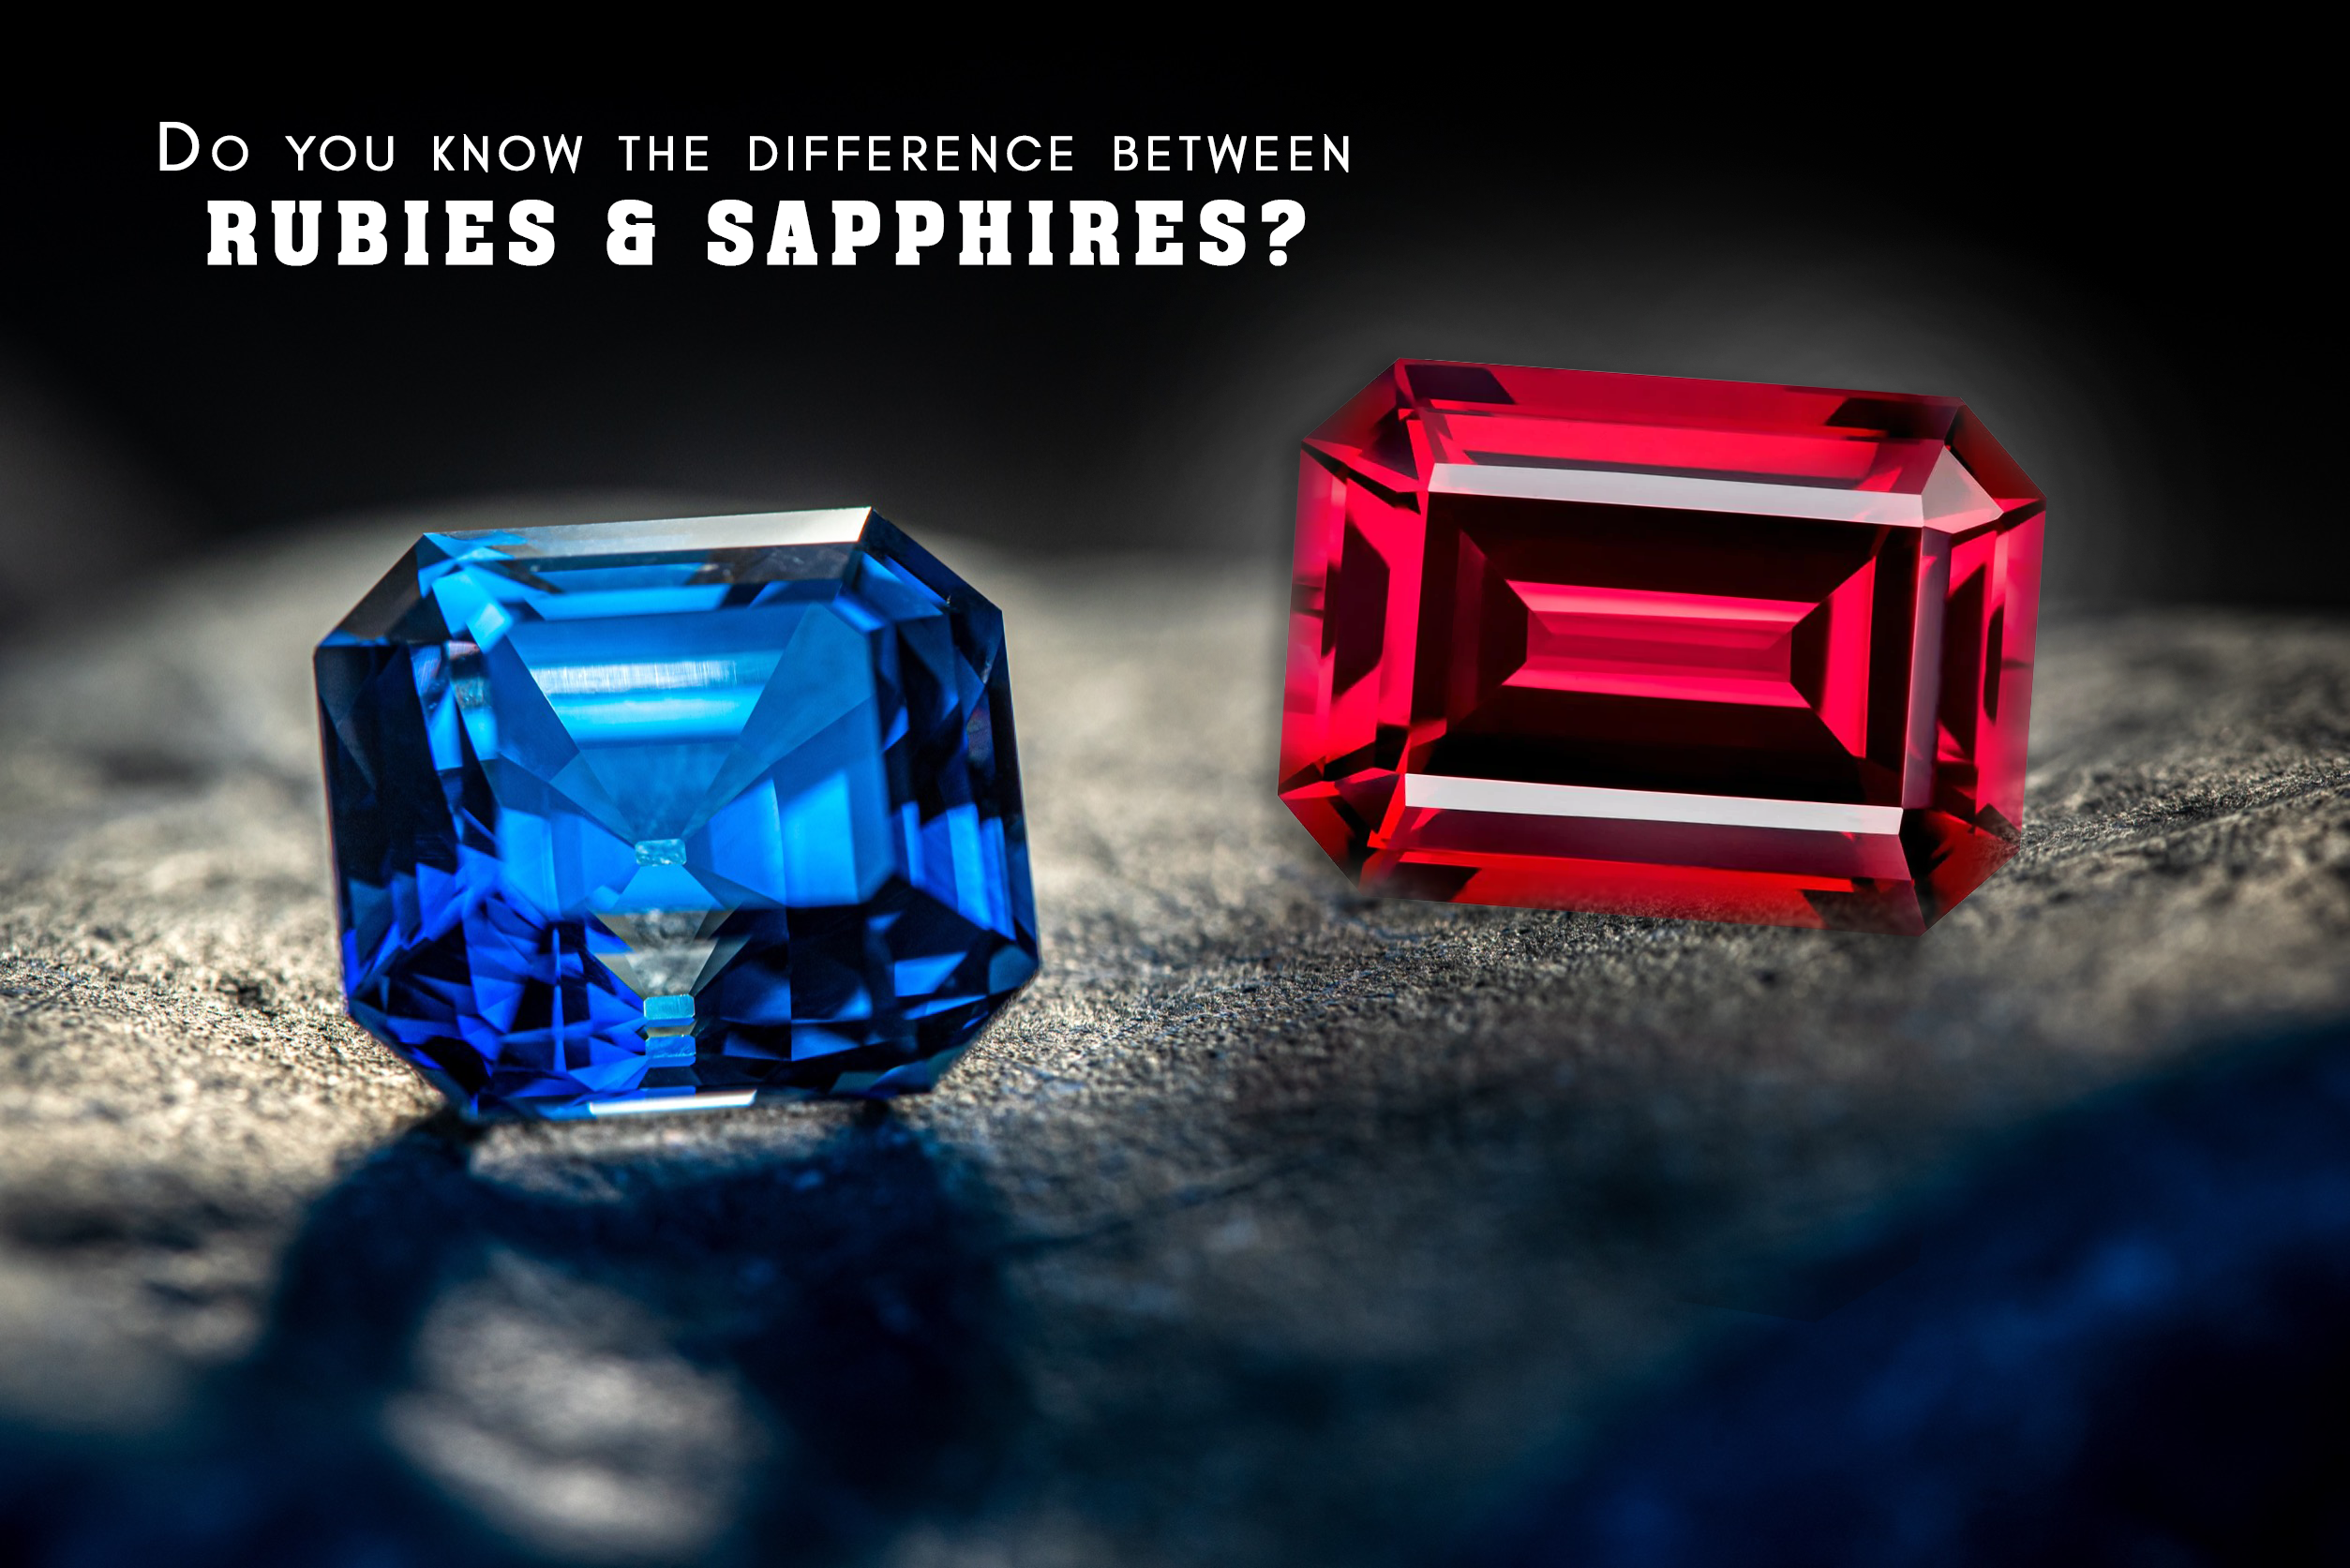 Do you know the difference between Rubies & Sapphires?